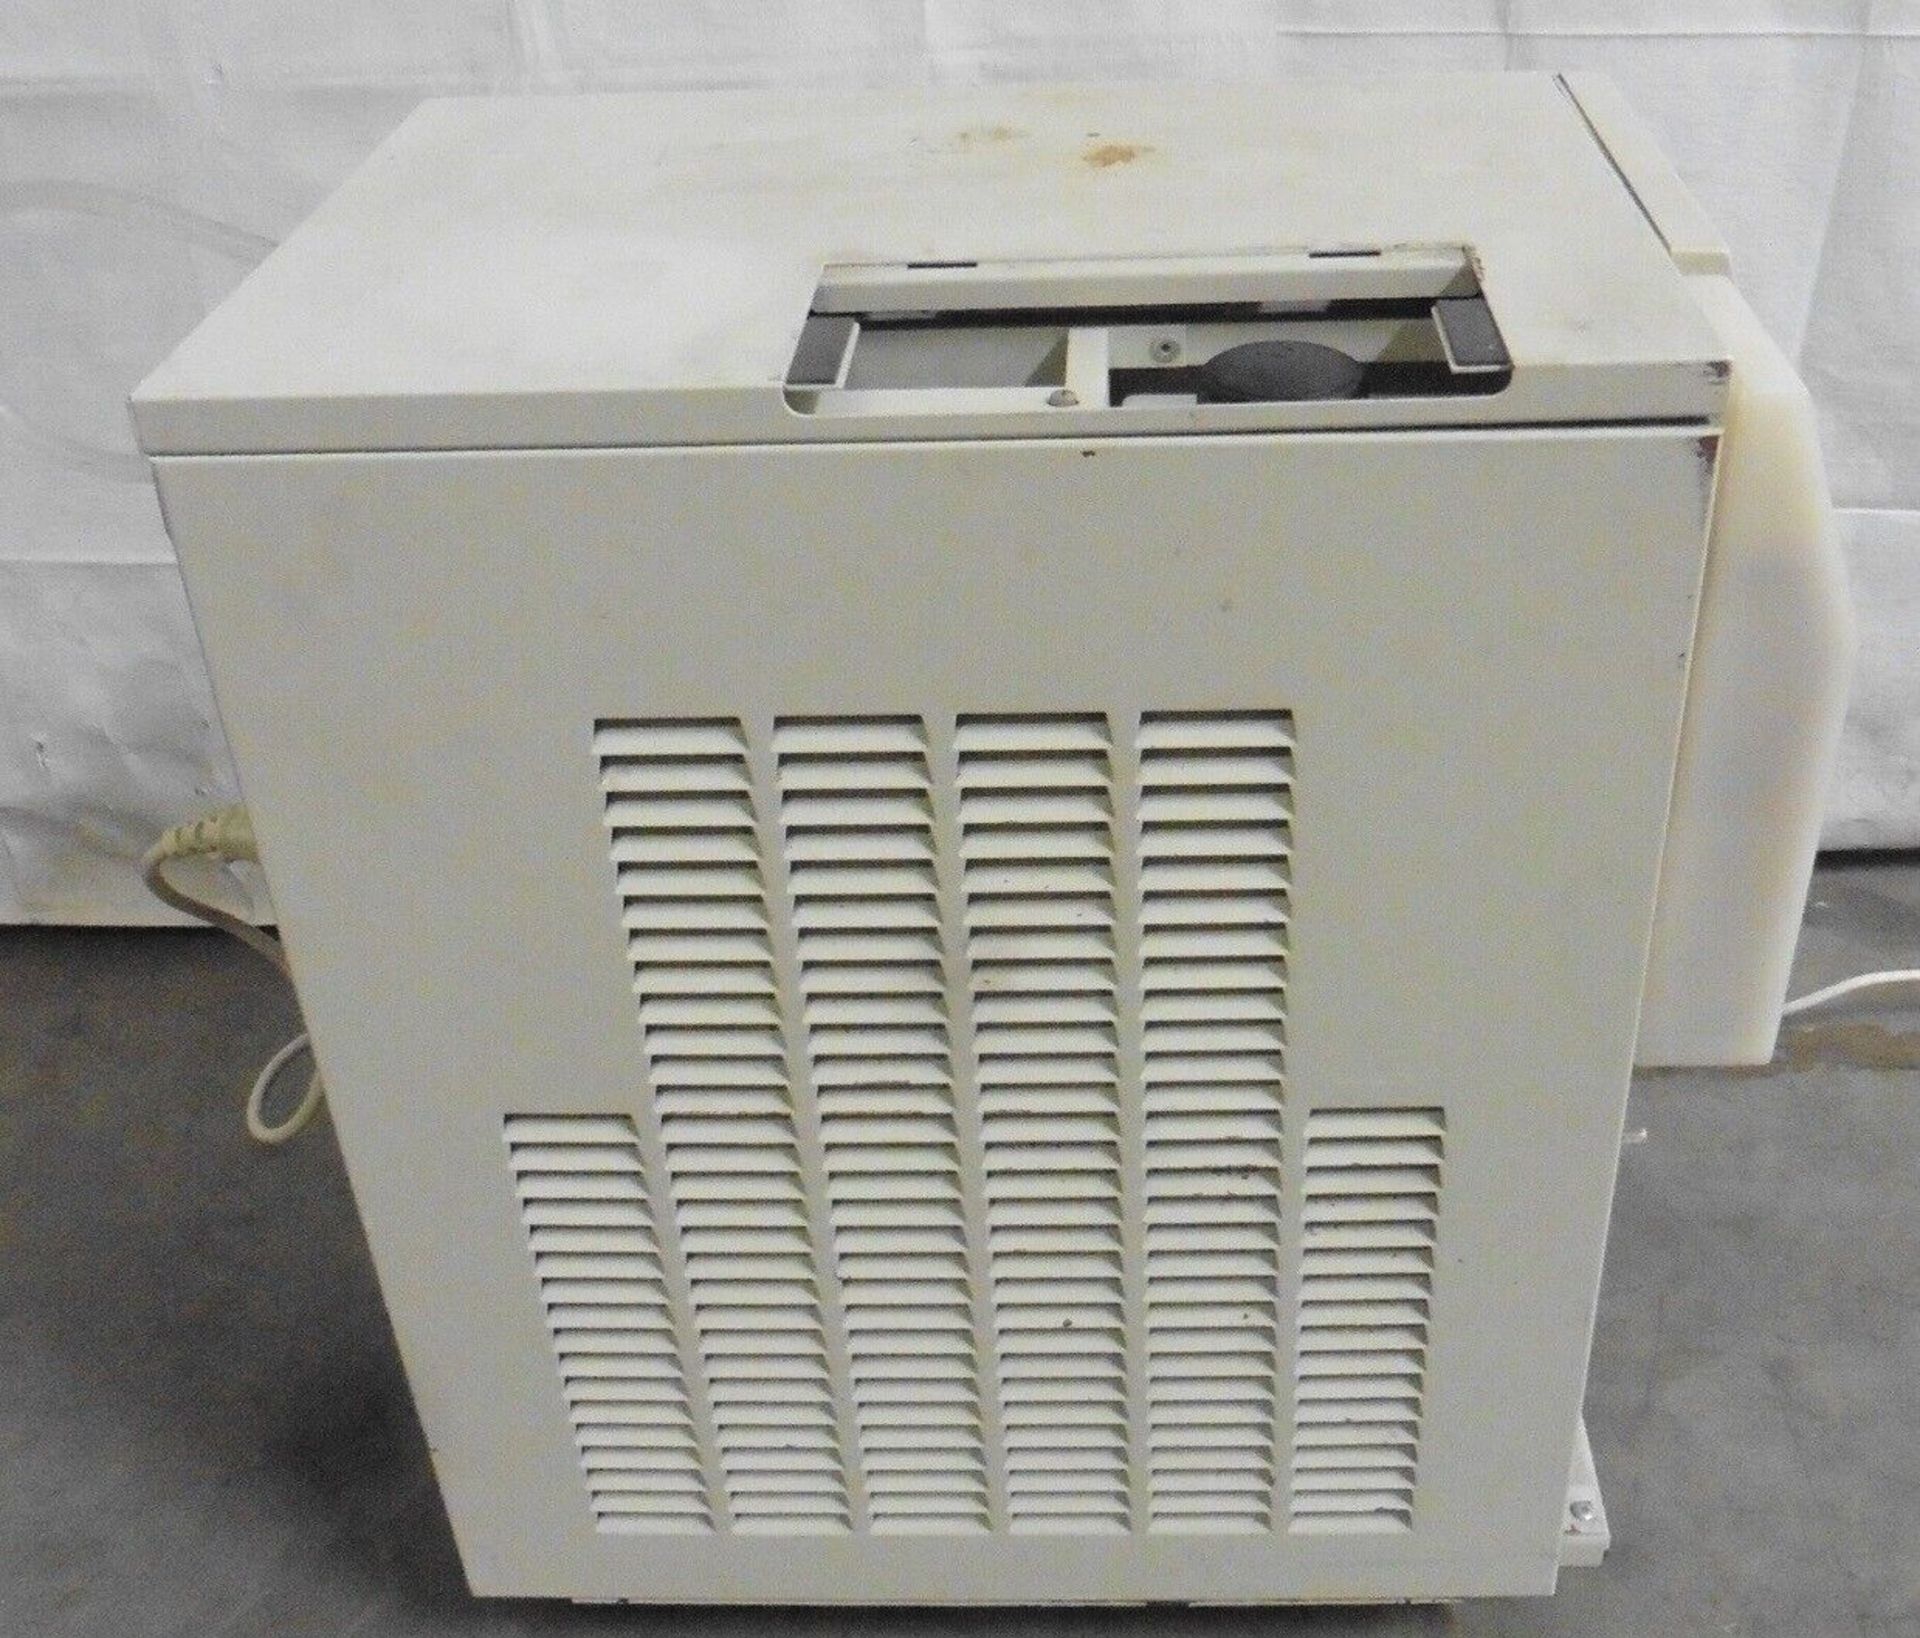 Thermo Neslab Merlin Series M25 Recirculating Chiller - Image 5 of 11